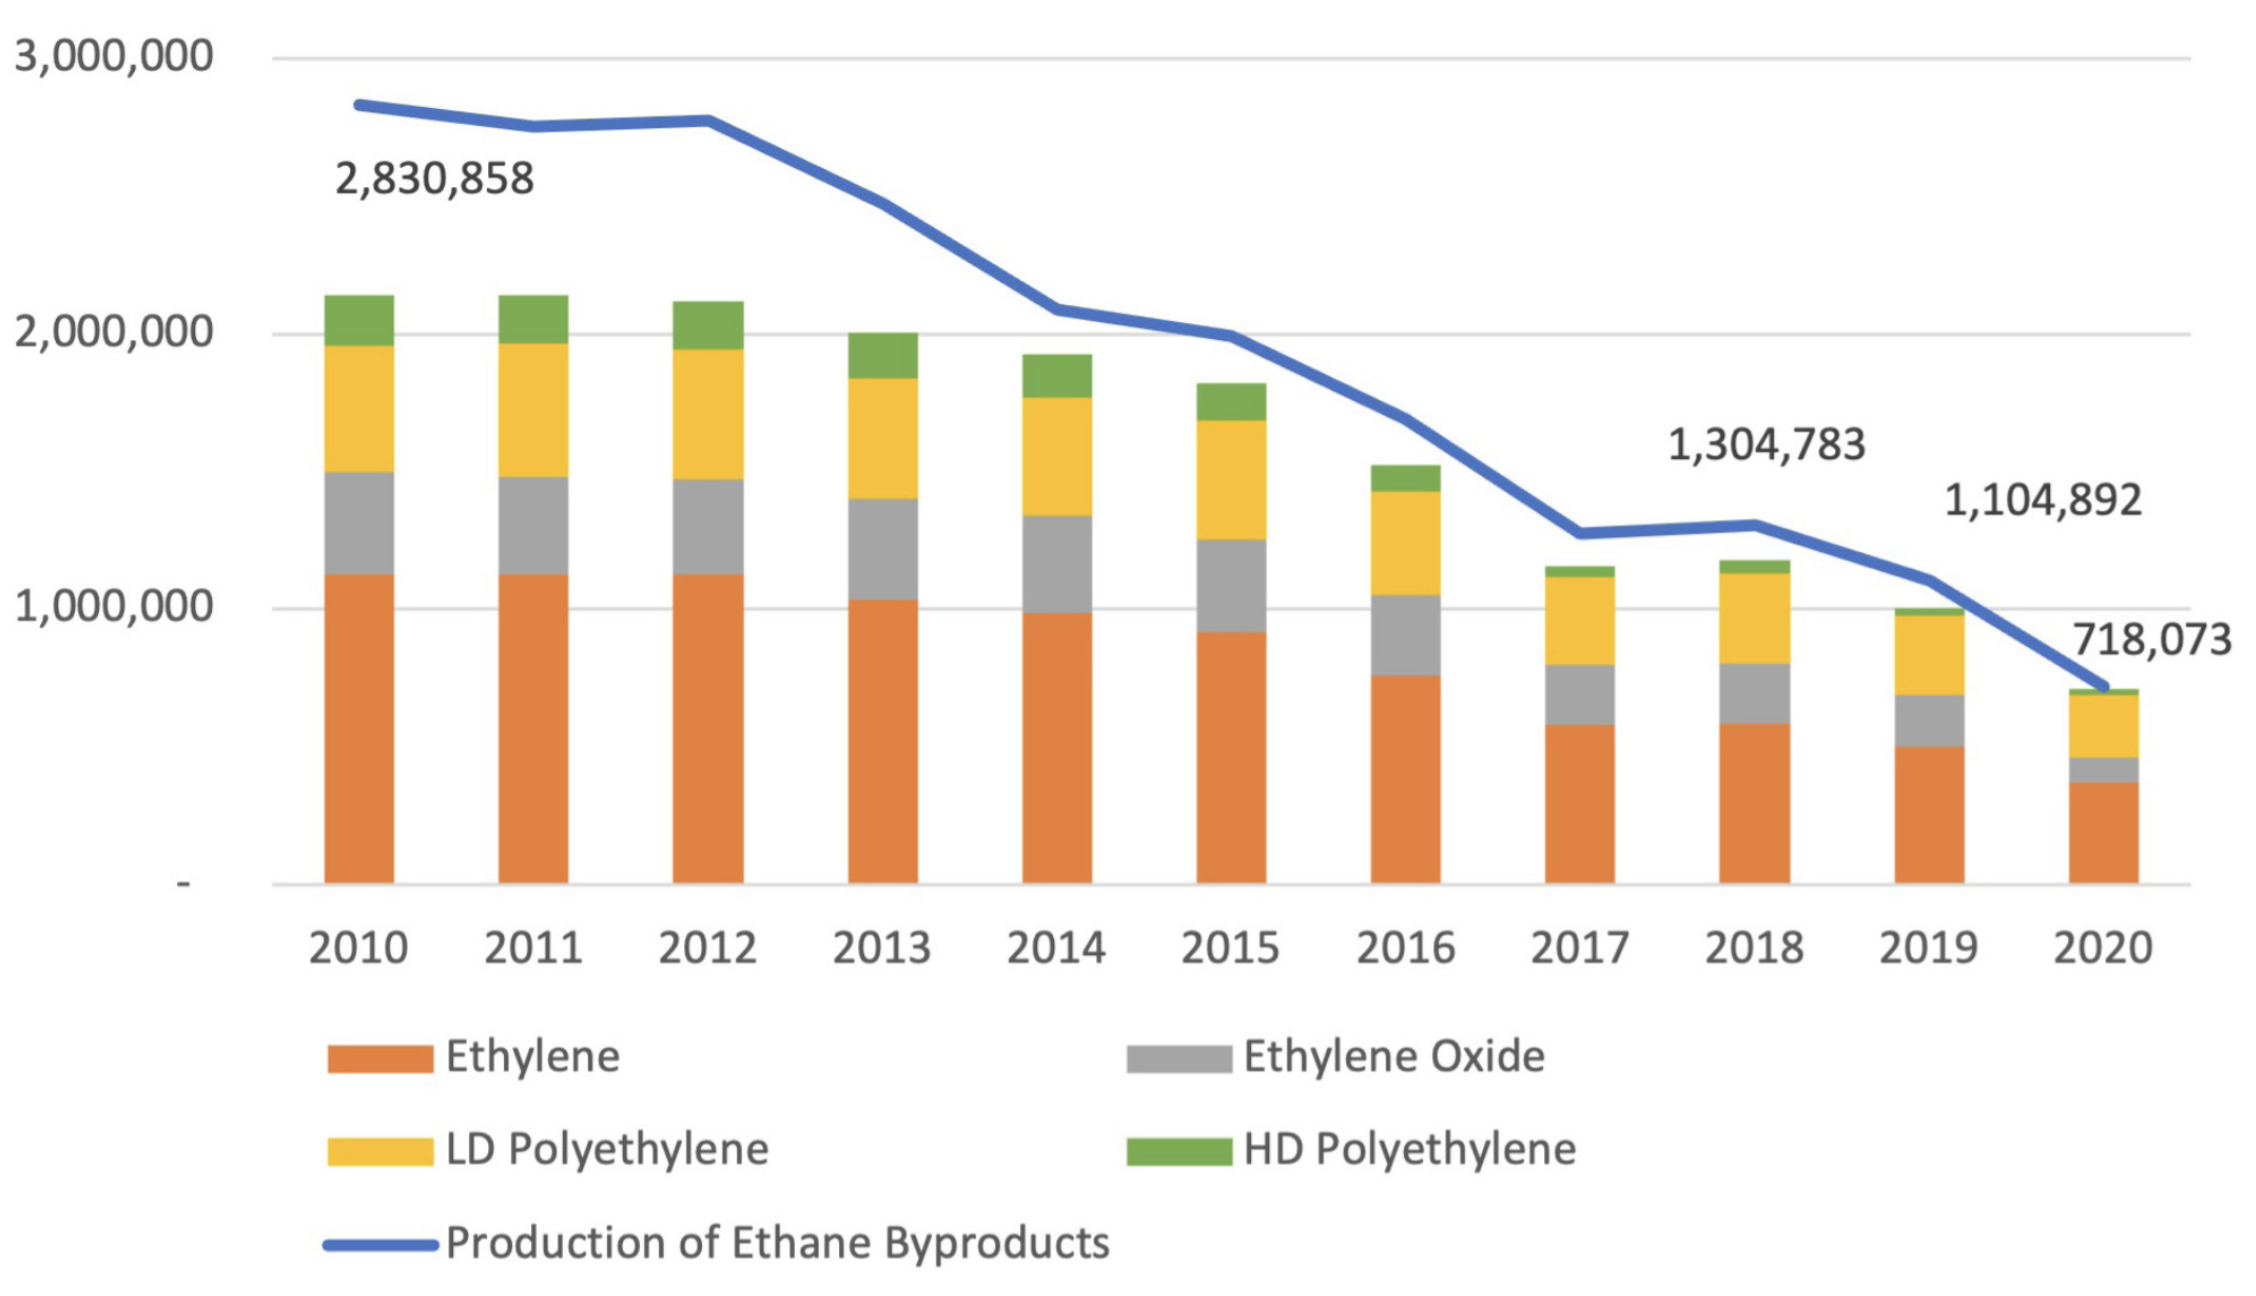 Figure 2 — PEMEX Production of Ethane Byproducts 2010-2020 (in Tons)